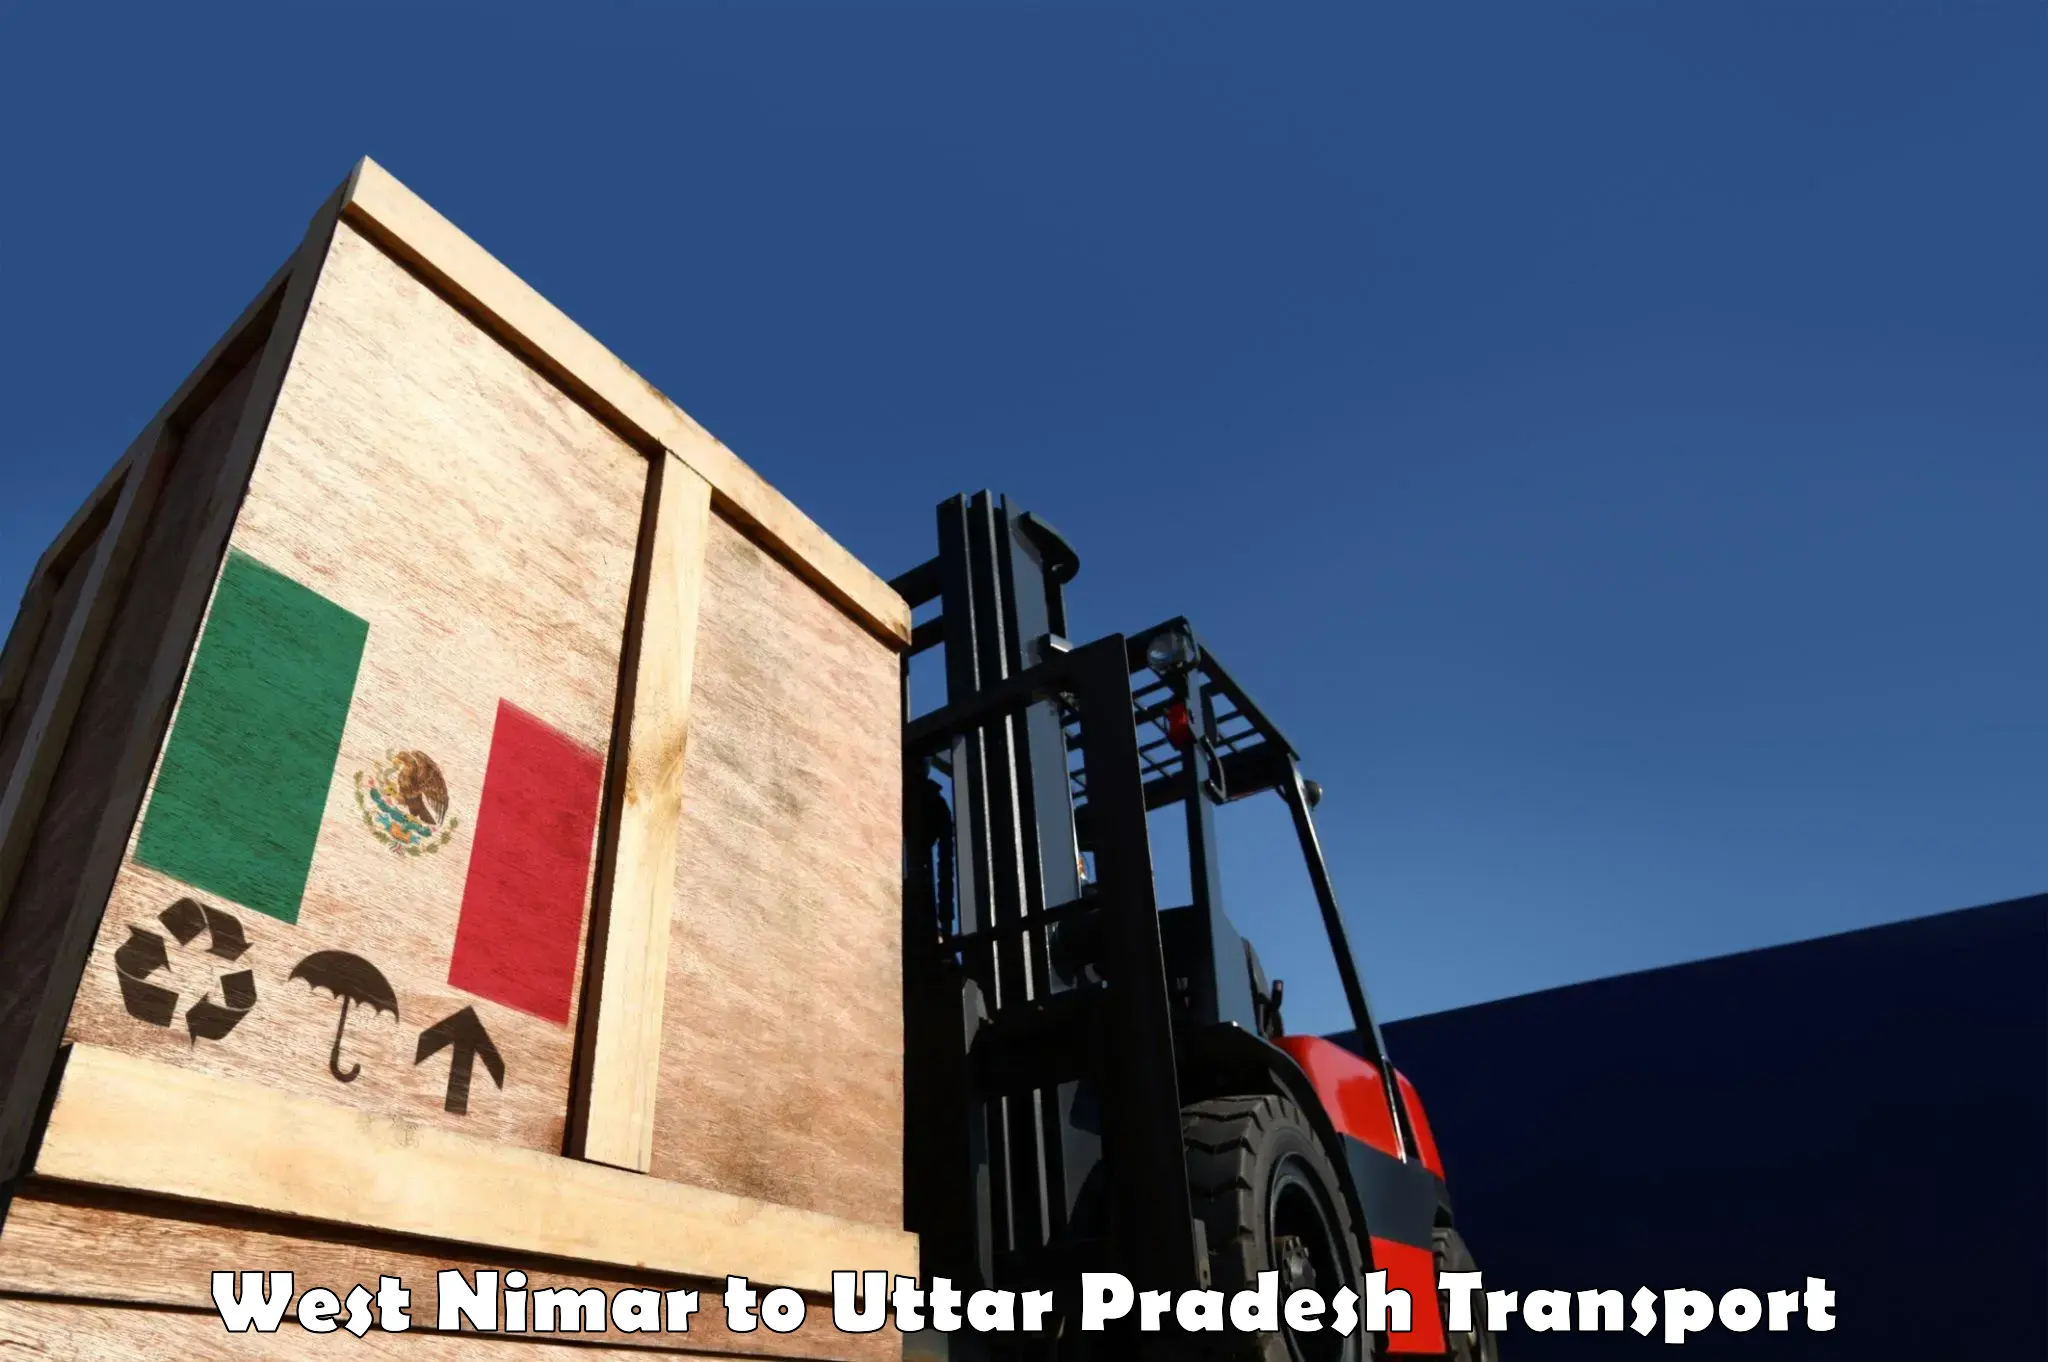 Truck transport companies in India in West Nimar to Lalitpur